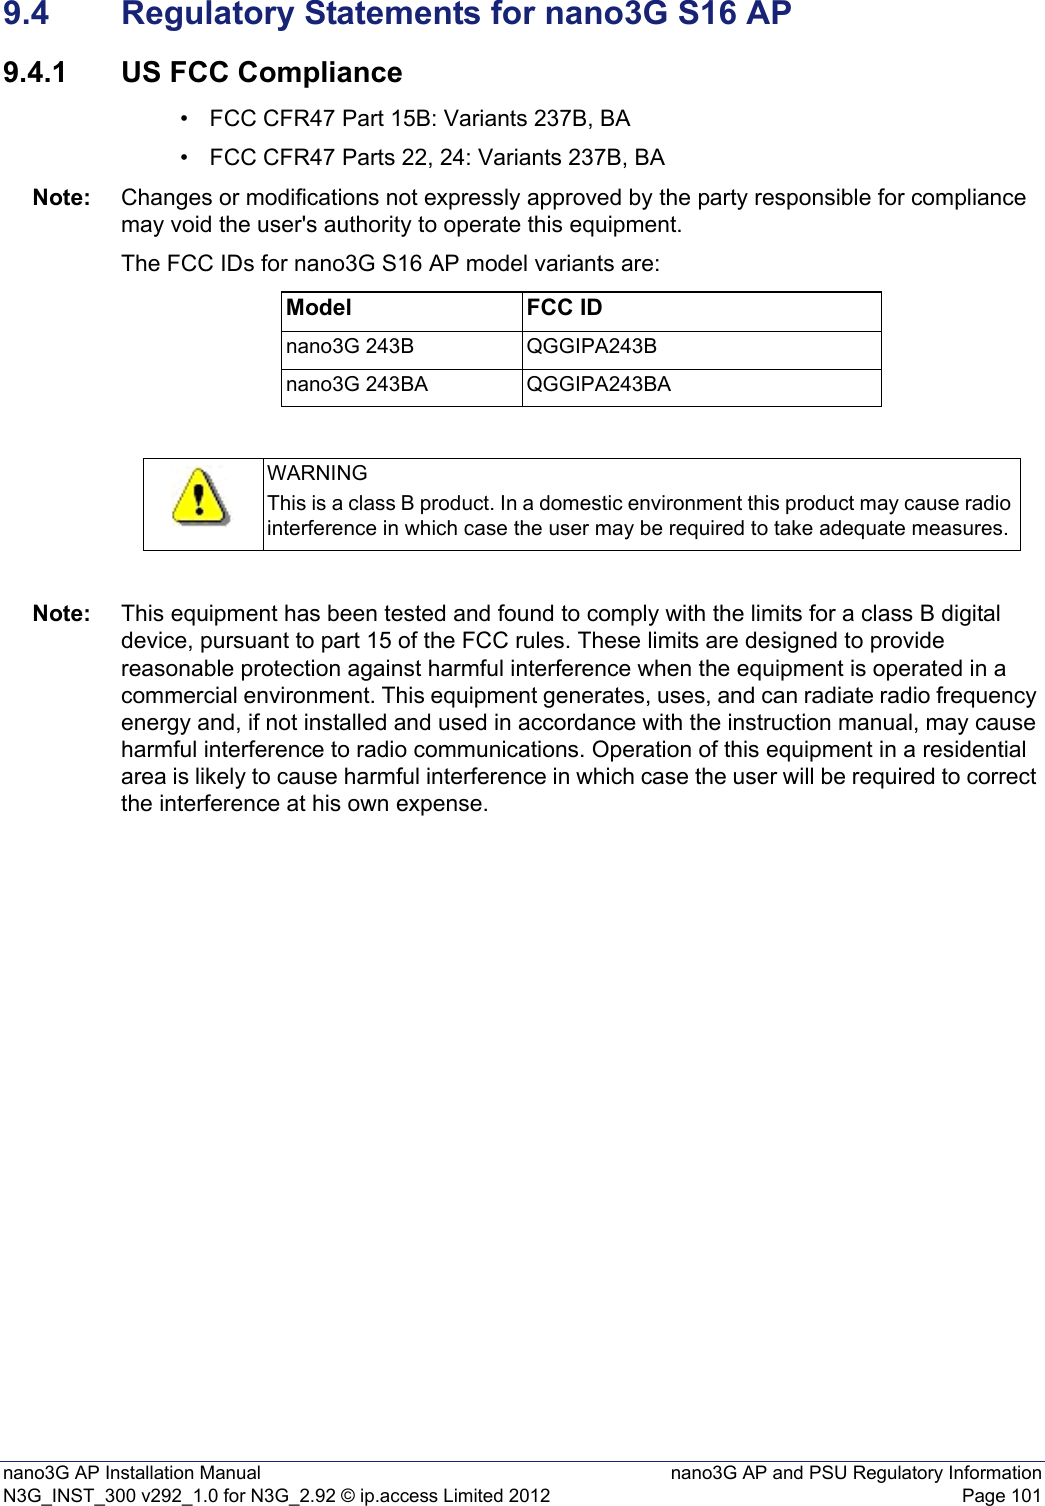 nano3G AP Installation Manual nano3G AP and PSU Regulatory InformationN3G_INST_300 v292_1.0 for N3G_2.92 © ip.access Limited 2012 Page 1019.4 Regulatory Statements for nano3G S16 AP9.4.1 US FCC Compliance• FCC CFR47 Part 15B: Variants 237B, BA• FCC CFR47 Parts 22, 24: Variants 237B, BANote: Changes or modifications not expressly approved by the party responsible for compliance may void the user&apos;s authority to operate this equipment.The FCC IDs for nano3G S16 AP model variants are:Note: This equipment has been tested and found to comply with the limits for a class B digital device, pursuant to part 15 of the FCC rules. These limits are designed to provide reasonable protection against harmful interference when the equipment is operated in a commercial environment. This equipment generates, uses, and can radiate radio frequency energy and, if not installed and used in accordance with the instruction manual, may cause harmful interference to radio communications. Operation of this equipment in a residential area is likely to cause harmful interference in which case the user will be required to correct the interference at his own expense.Model FCC IDnano3G 243B QGGIPA243Bnano3G 243BA QGGIPA243BAWARNINGThis is a class B product. In a domestic environment this product may cause radio interference in which case the user may be required to take adequate measures.